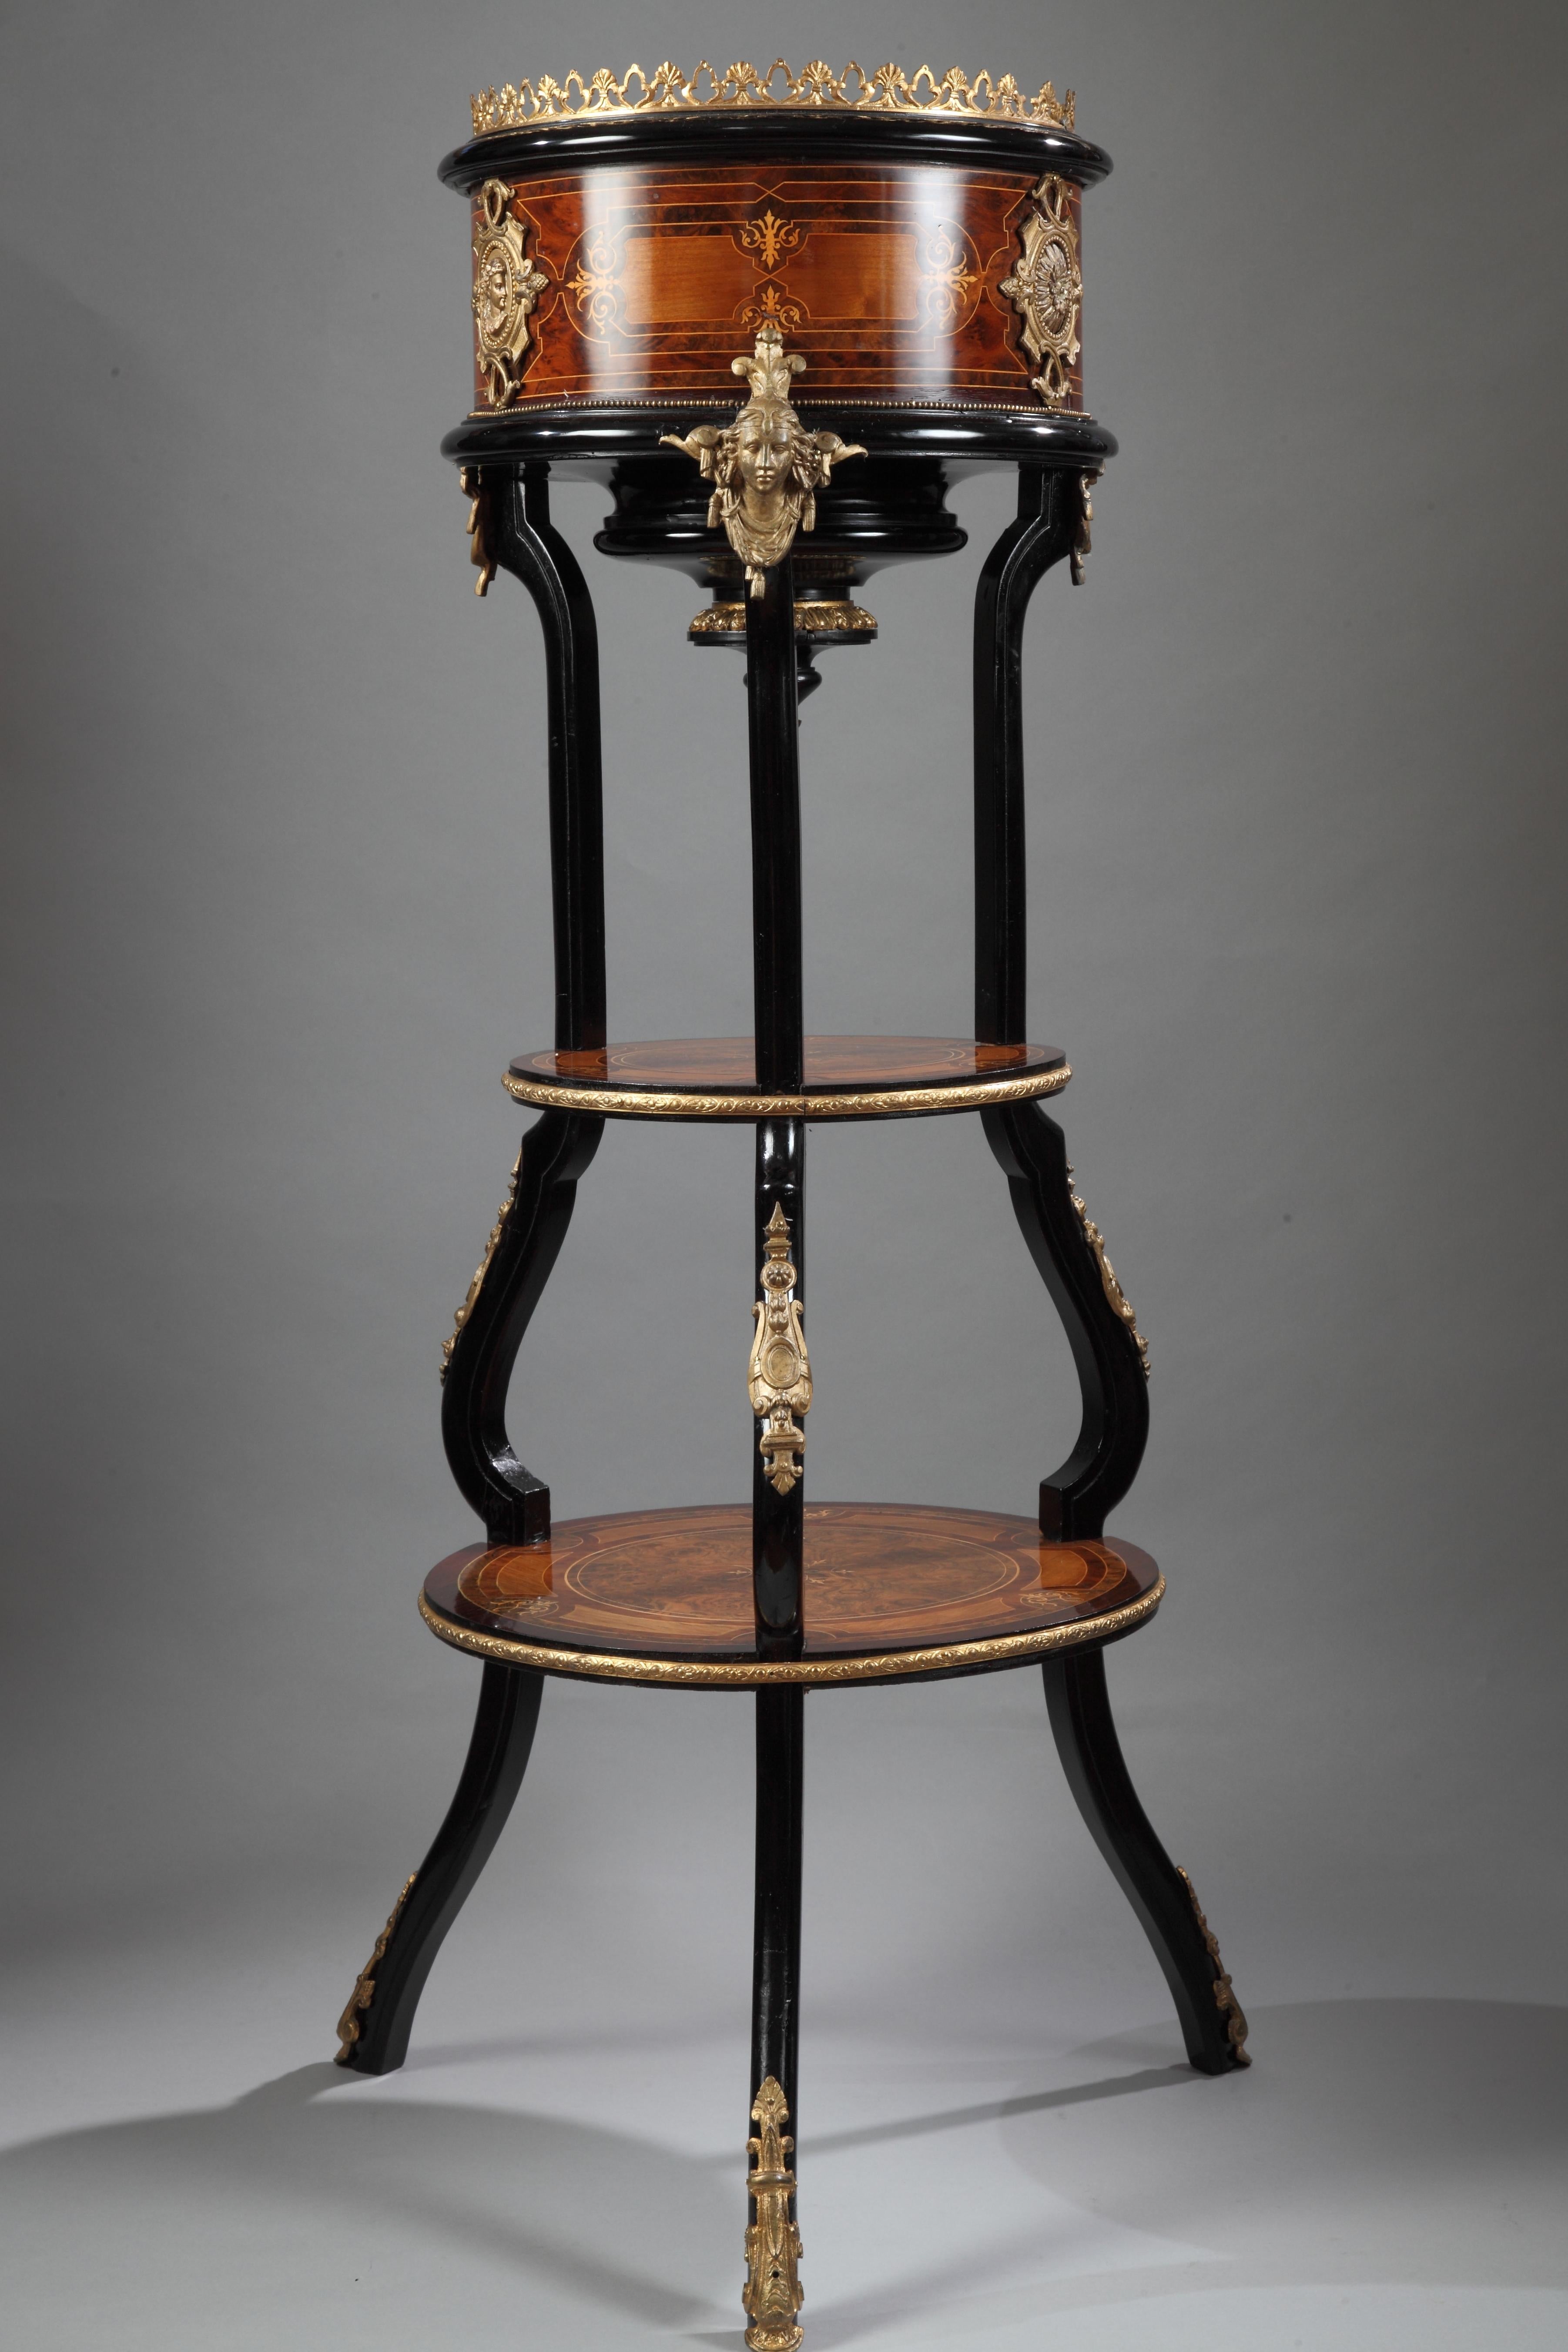 Circular plant pot with a double tray united by a black tripod attributed to C-G Diehl. Charming wood marquetry. A beautiful gilded bronze adornment complete this piece.

Arriving in Paris in circa 1840 Charles-Guillaume Diehl (1811-1885) founded